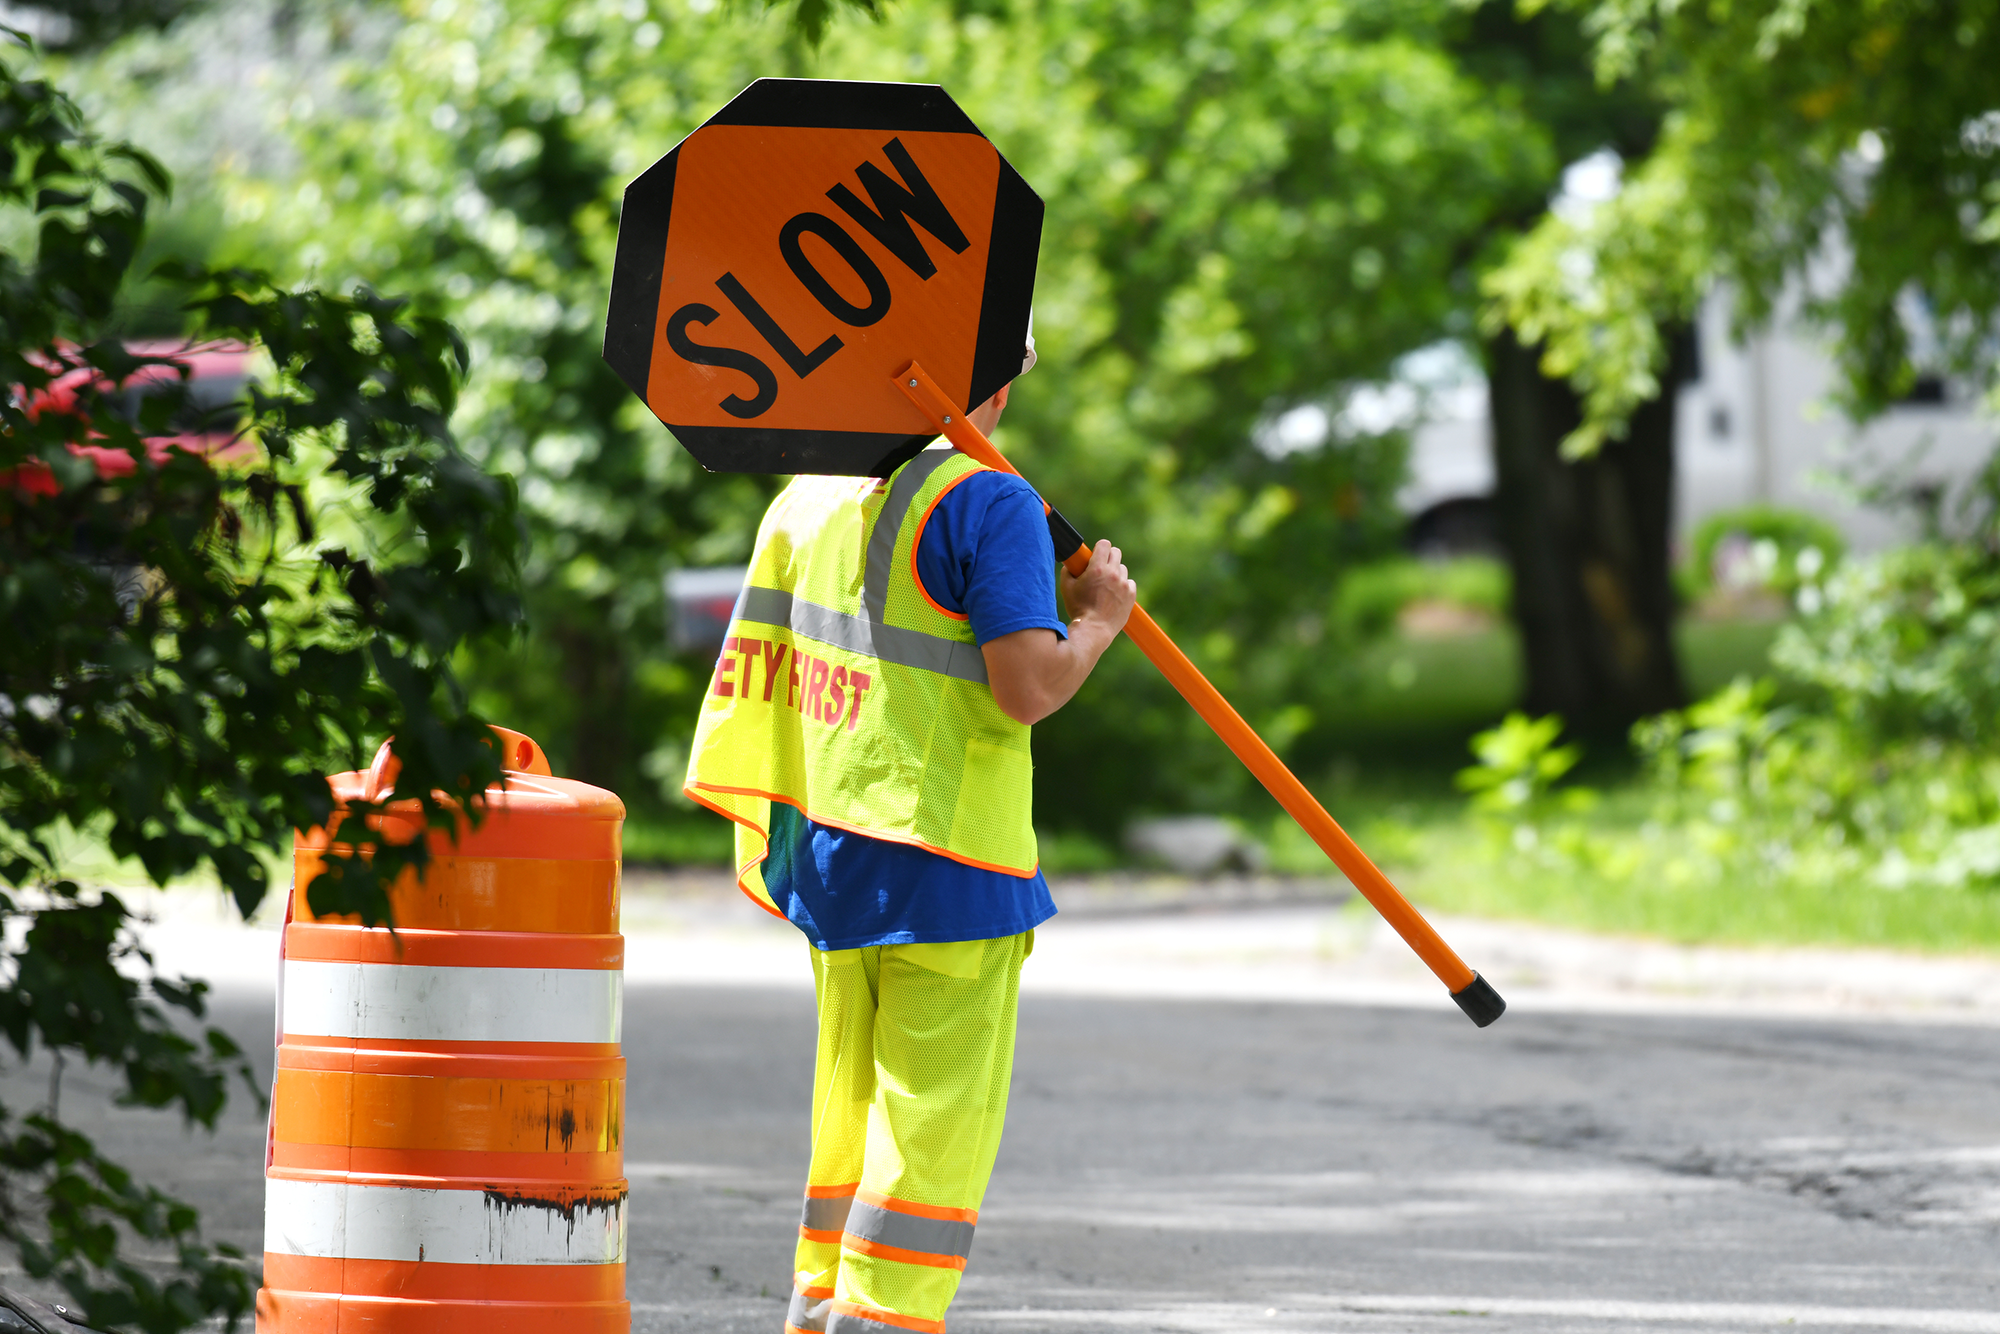 National Work Zone Awareness Week Takes Place April 15-19: A construction worker holding a slow sign in a construction work zone.